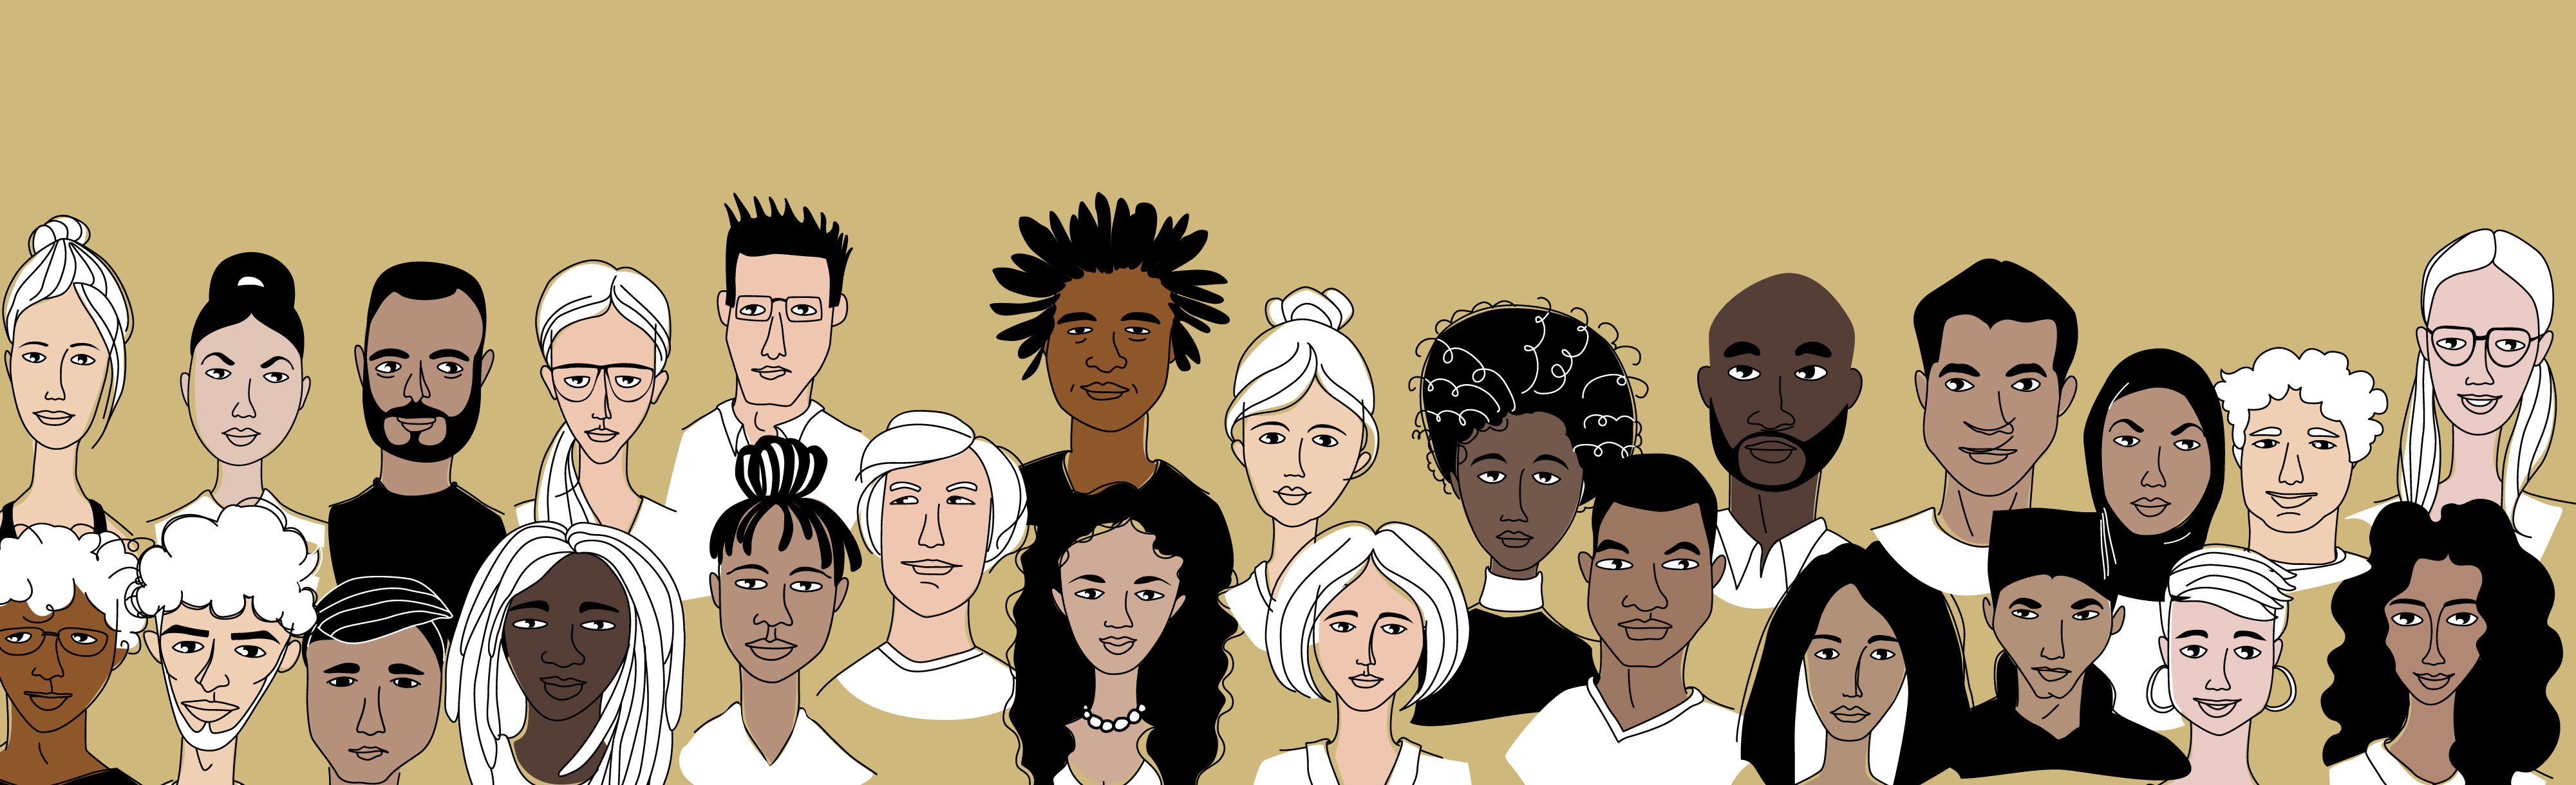 Graphic of diverse group of people